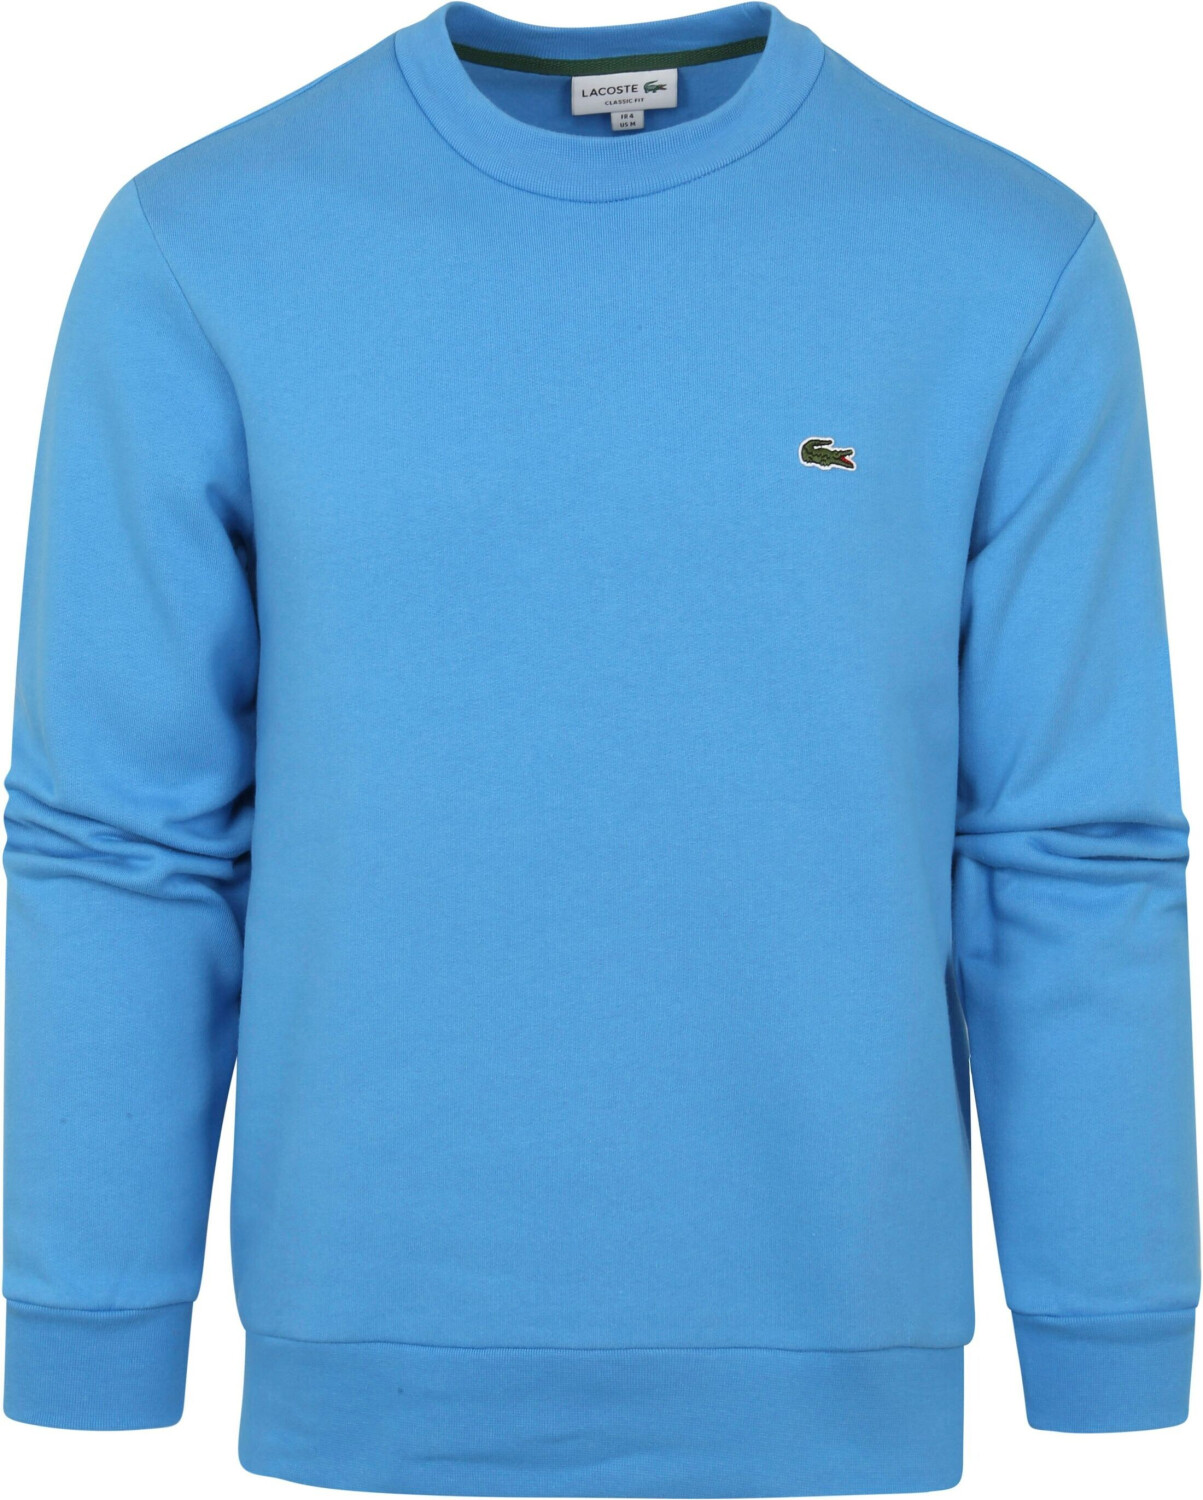 Buy Lacoste Sweatshirts argentine blue from – (SH9608) £68.00 on Deals (Today) Best